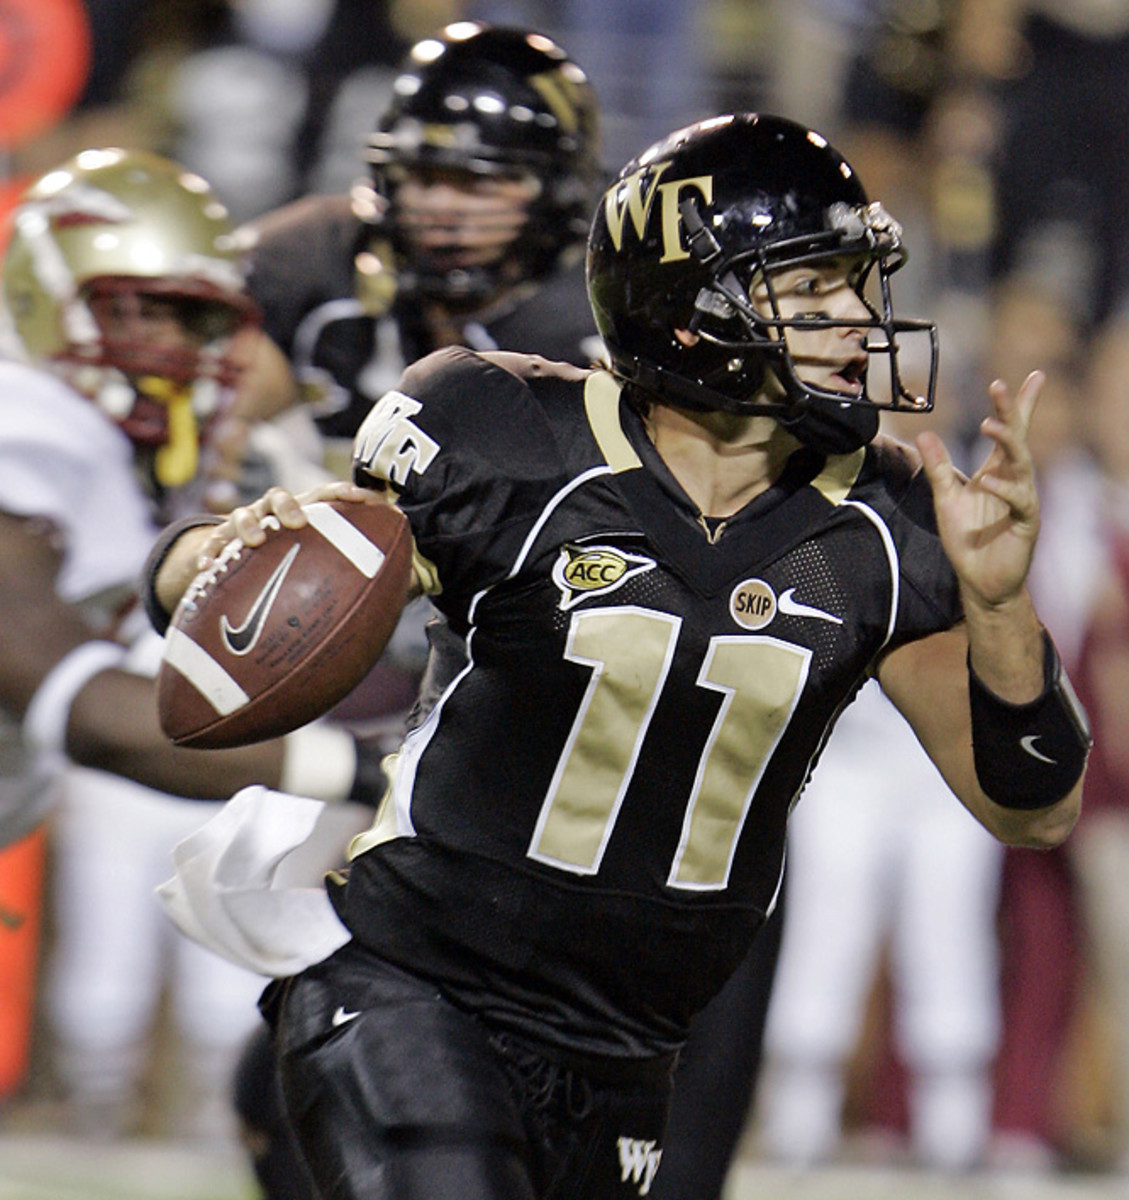 Wake Forest 24, No. 21 Florida State 21